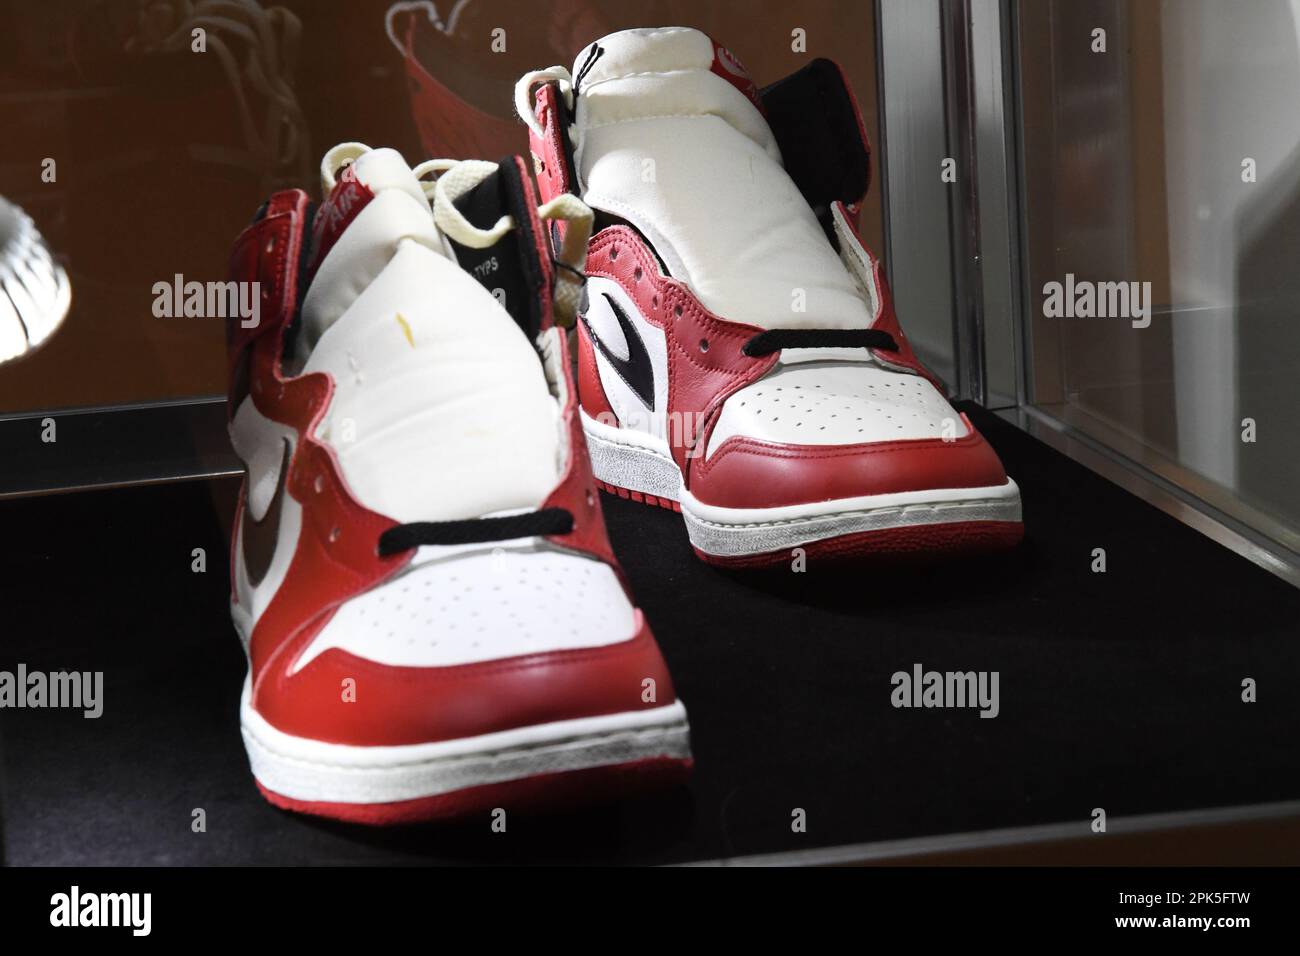 New York, USA. 05th Apr, 2023. Michael Jordan Signed 1985 'Player Sample'  Air Jordan 15 (sizes 13, 13.5), est. $100,000-200,000, are shown at  Sotheby's in New York, NY on April 5, 2023. "